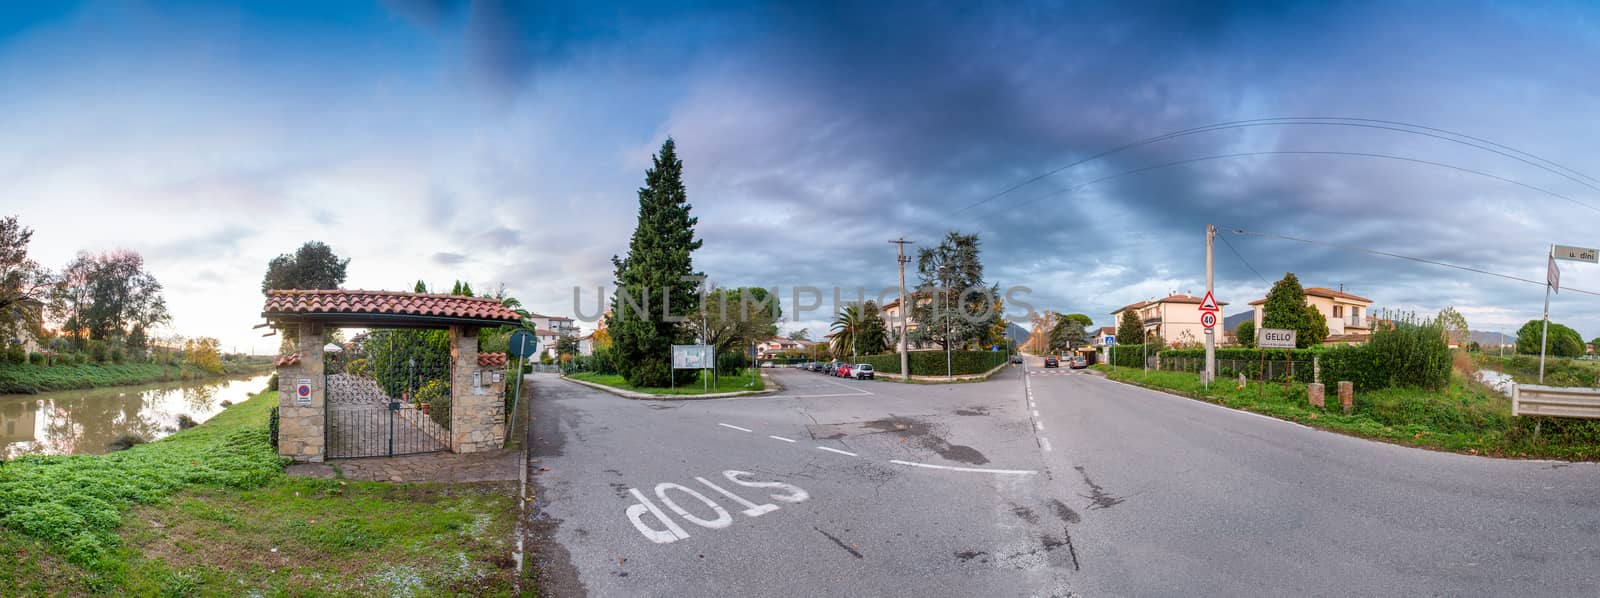 Beautiful countryside wet road intersection at dusk by jovannig